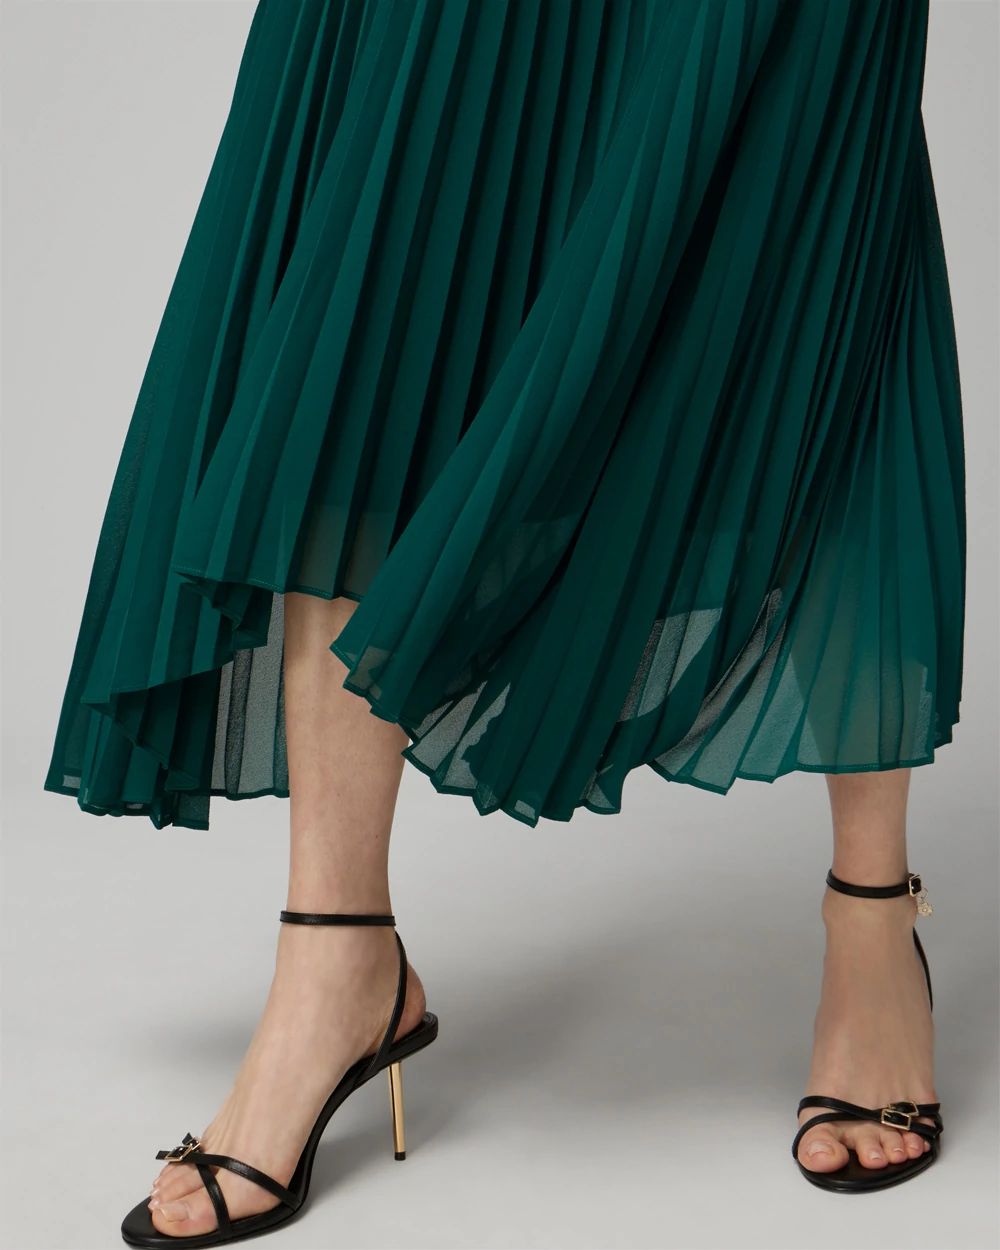 Pleated Halter Midi Dress click to view larger image.